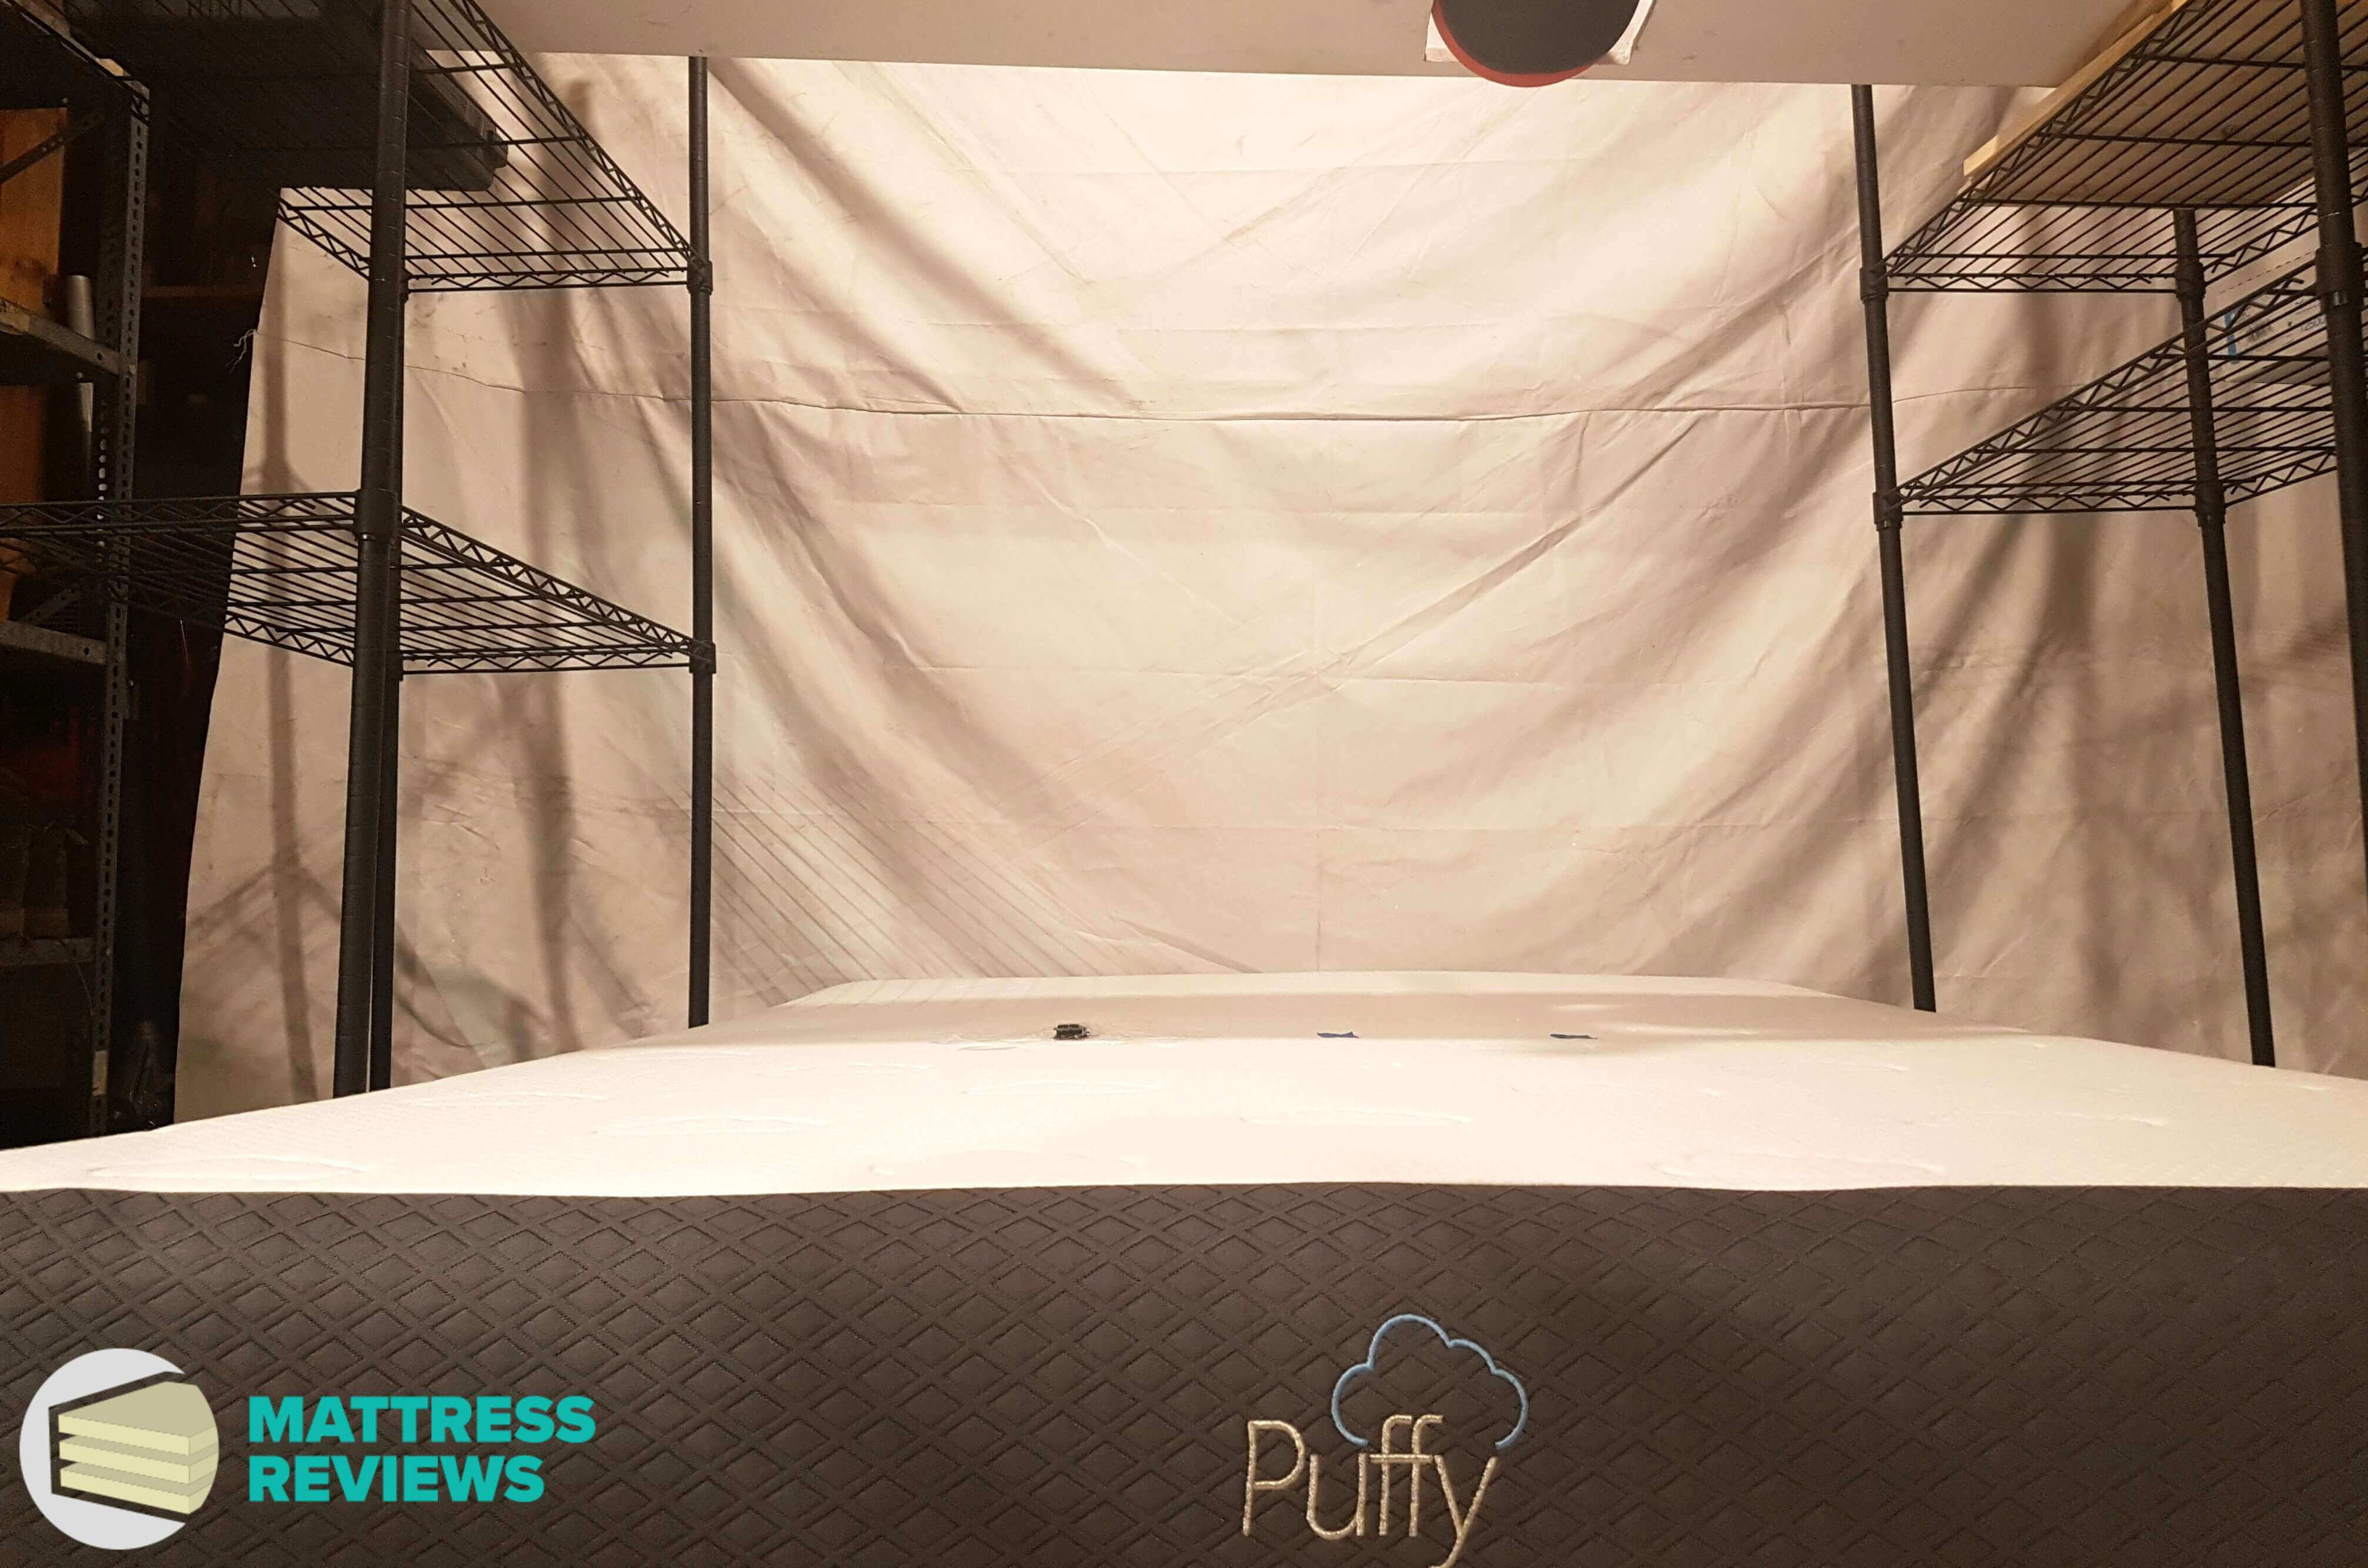 Image of the Puffy mattress motion isolation test.